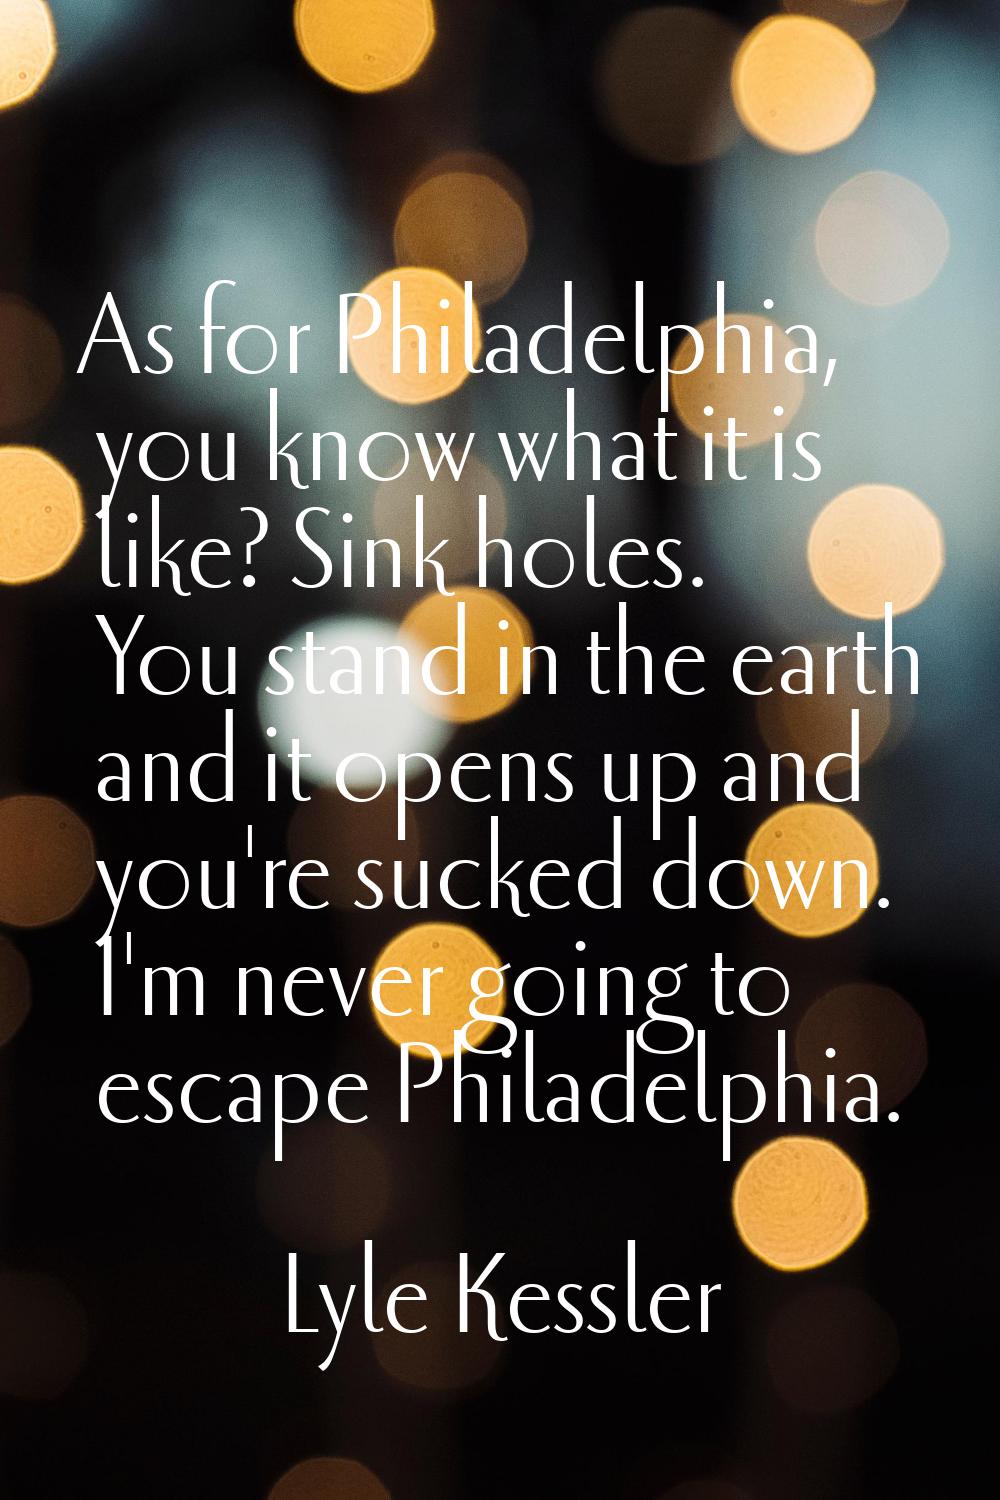 As for Philadelphia, you know what it is like? Sink holes. You stand in the earth and it opens up a